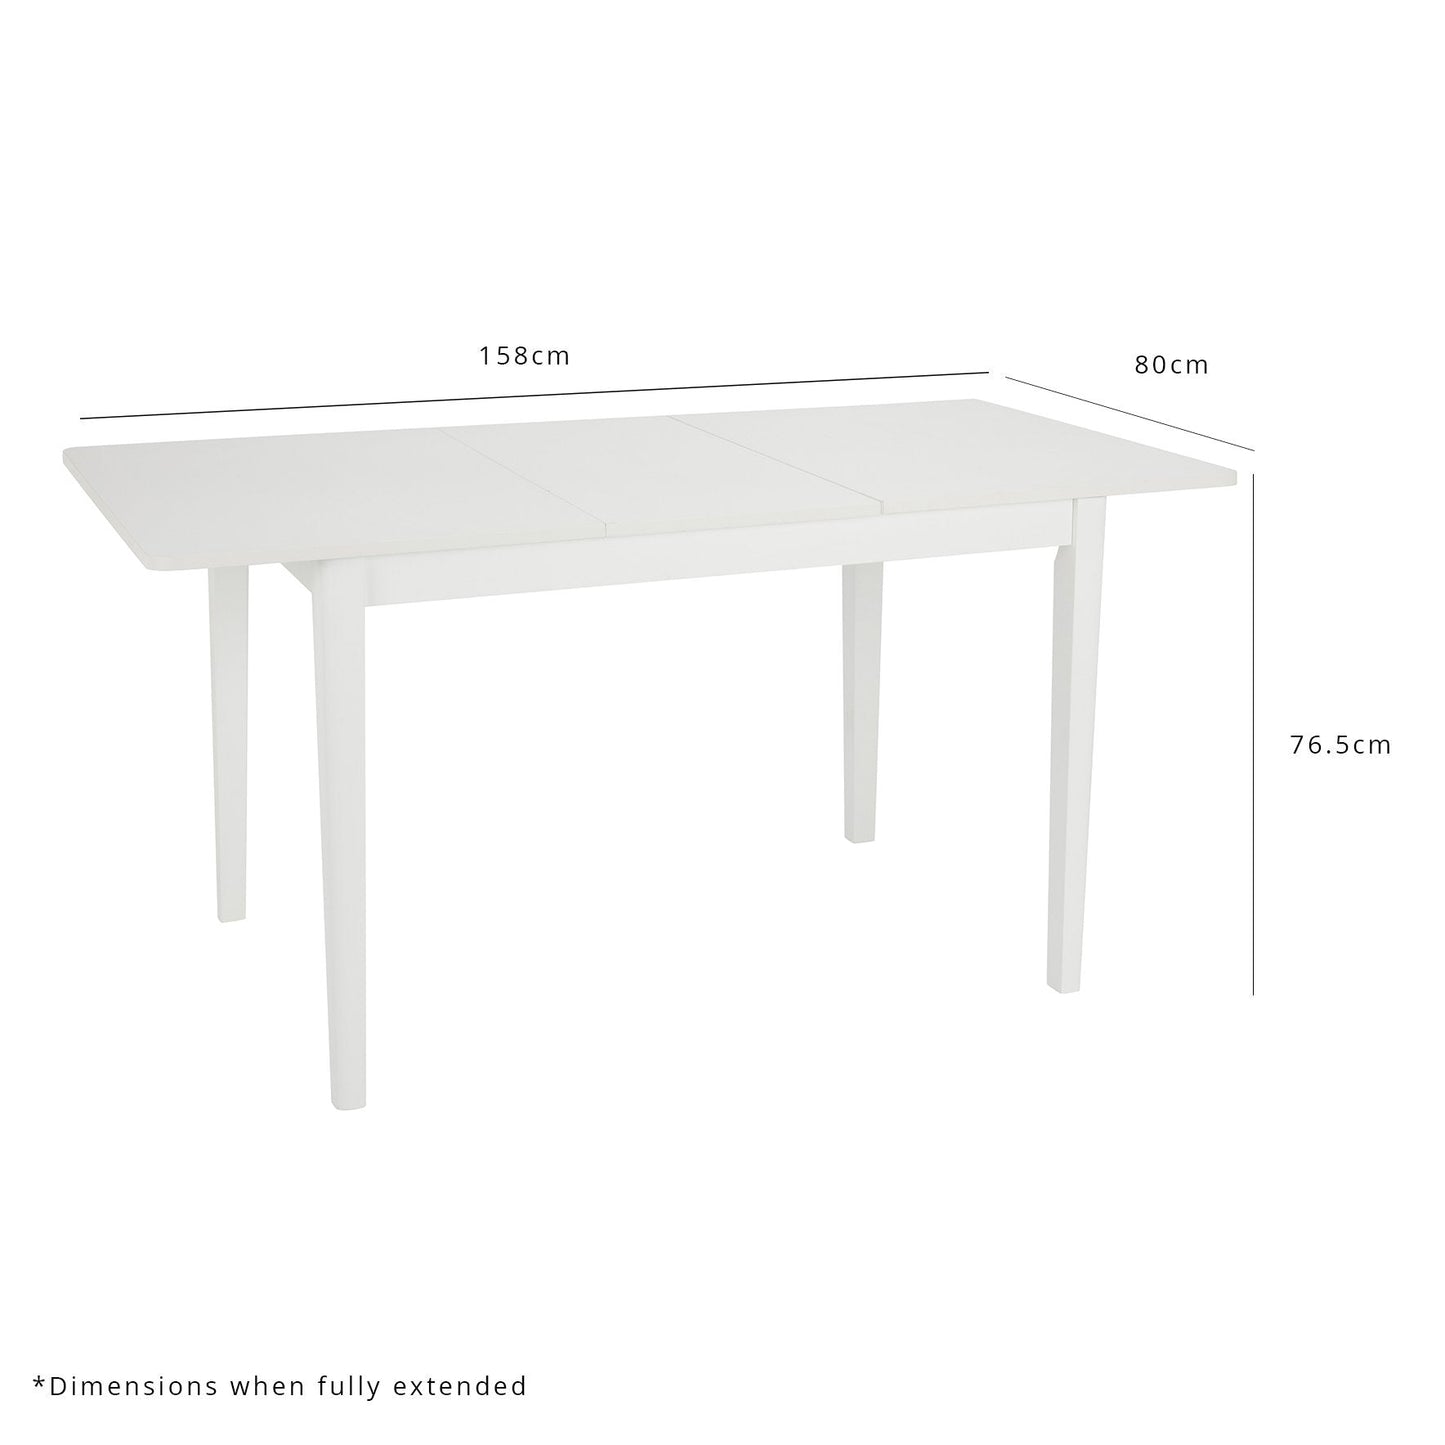 Paul extendable dining table with 6 chairs - large - white